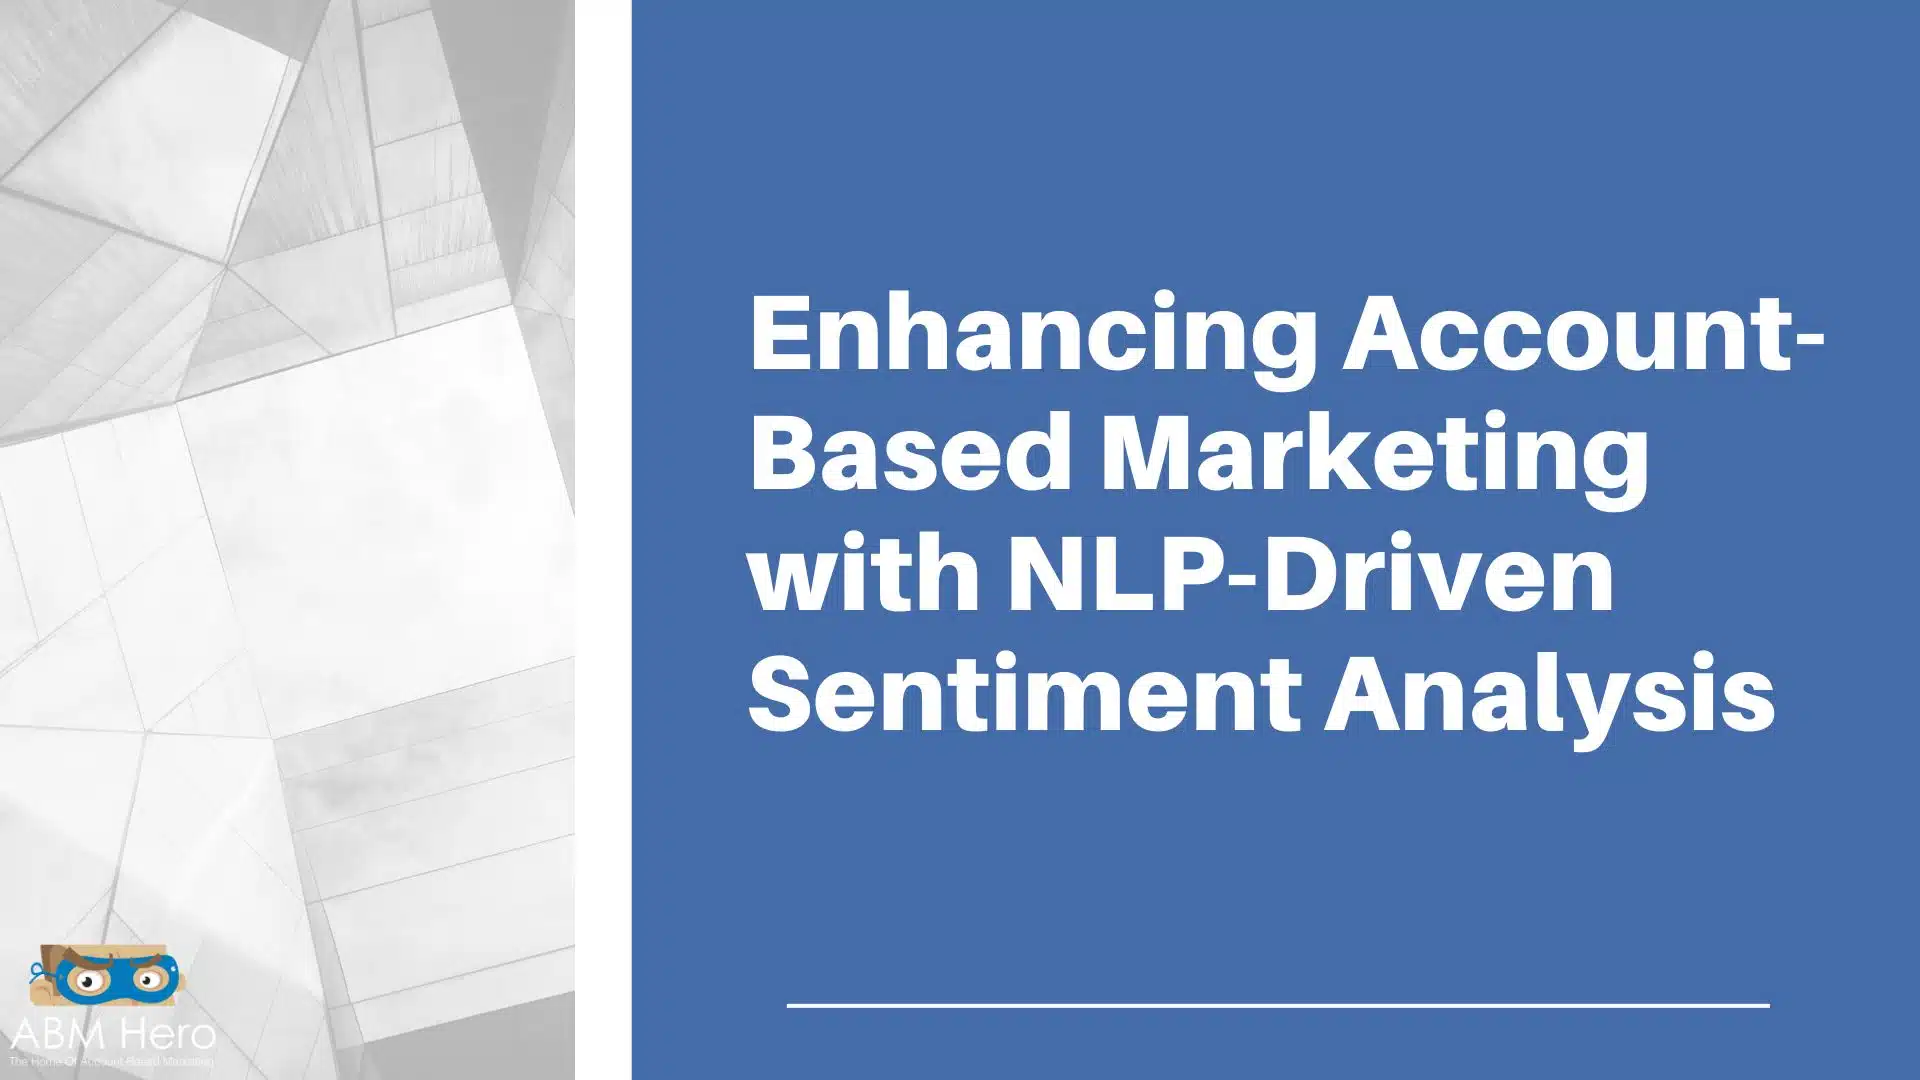 You are currently viewing Enhancing Account-Based Marketing with NLP-Driven Sentiment Analysis